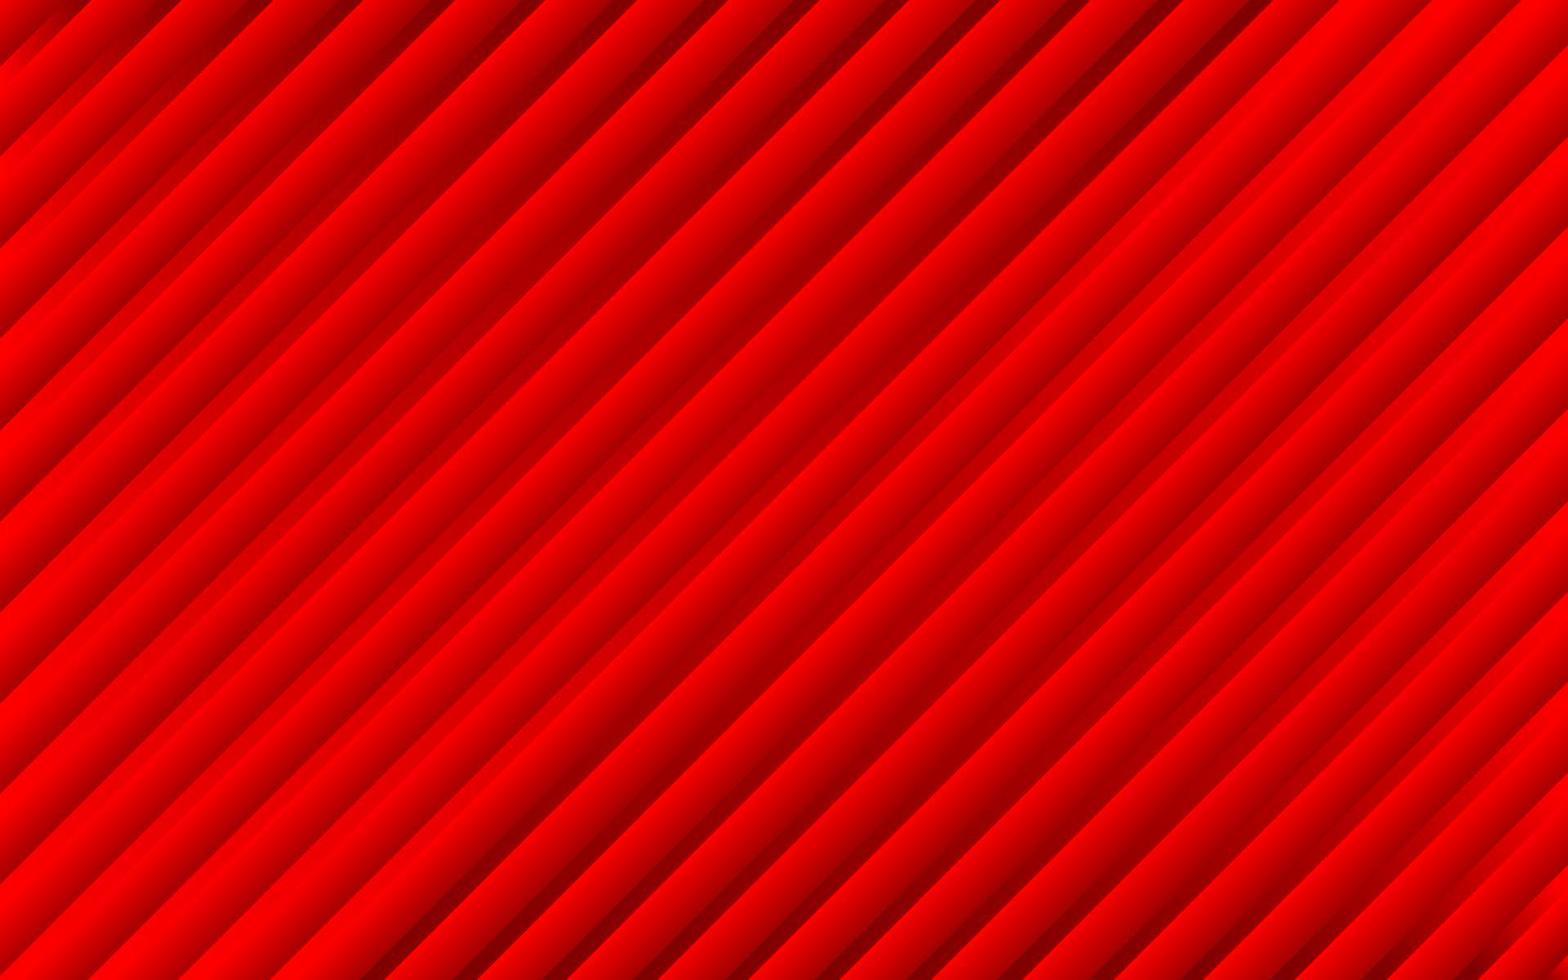 Abstract metal background with red diagonal lines. Oblique vector stripes illustration